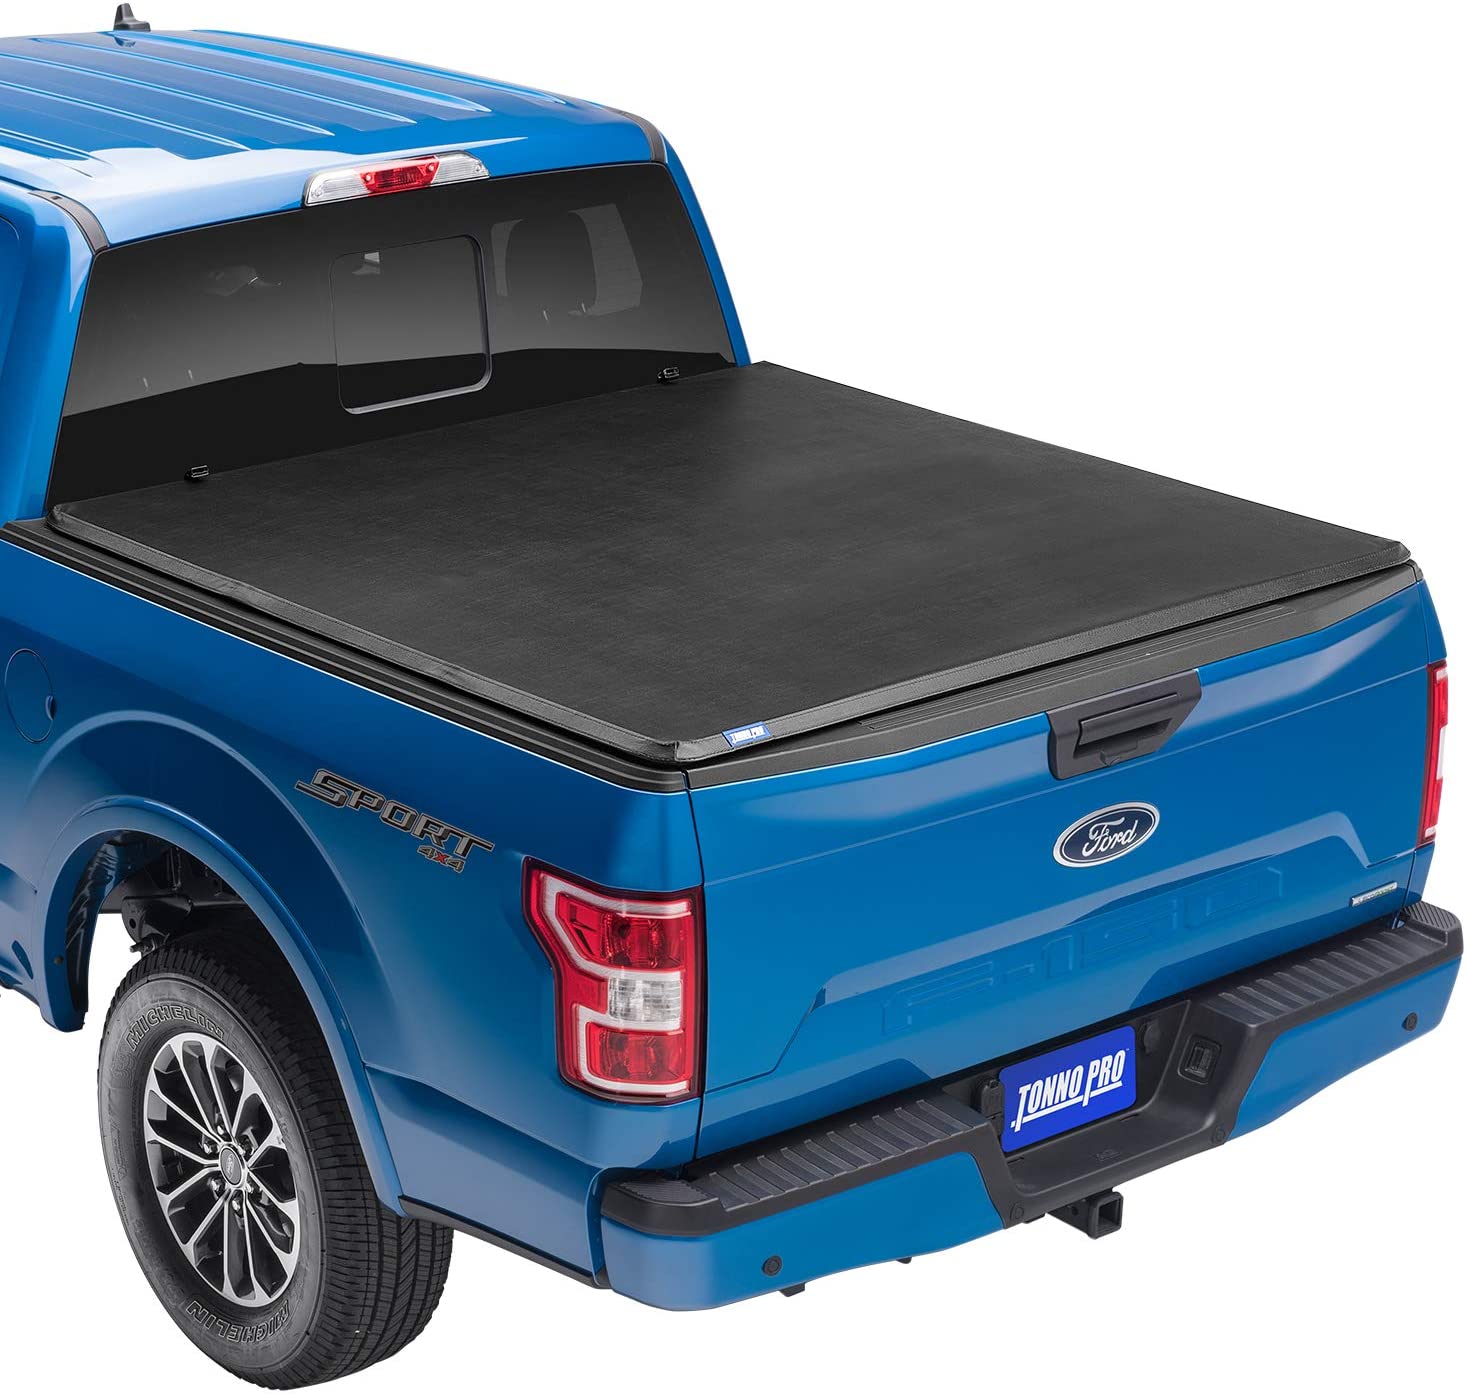 MADE IN THE USA Gator ETX Soft Tri-Fold Truck Bed Tonneau Cover 2017-2019 Ford Super Duty 6.75 Bed 59315 